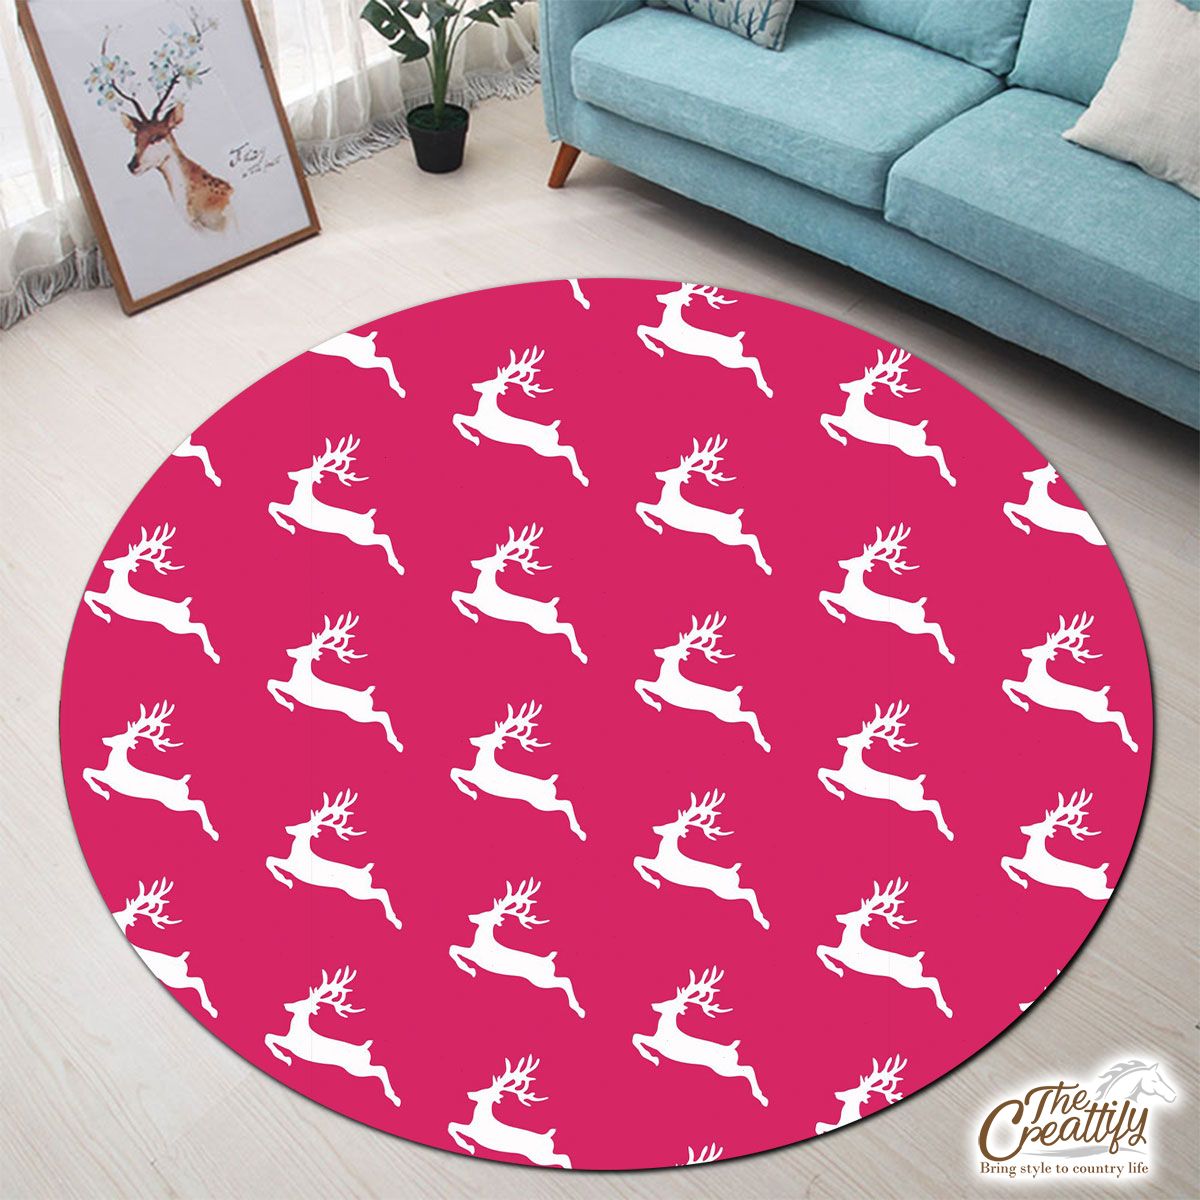 Pink And White Christmas Reindeeer Round Carpet